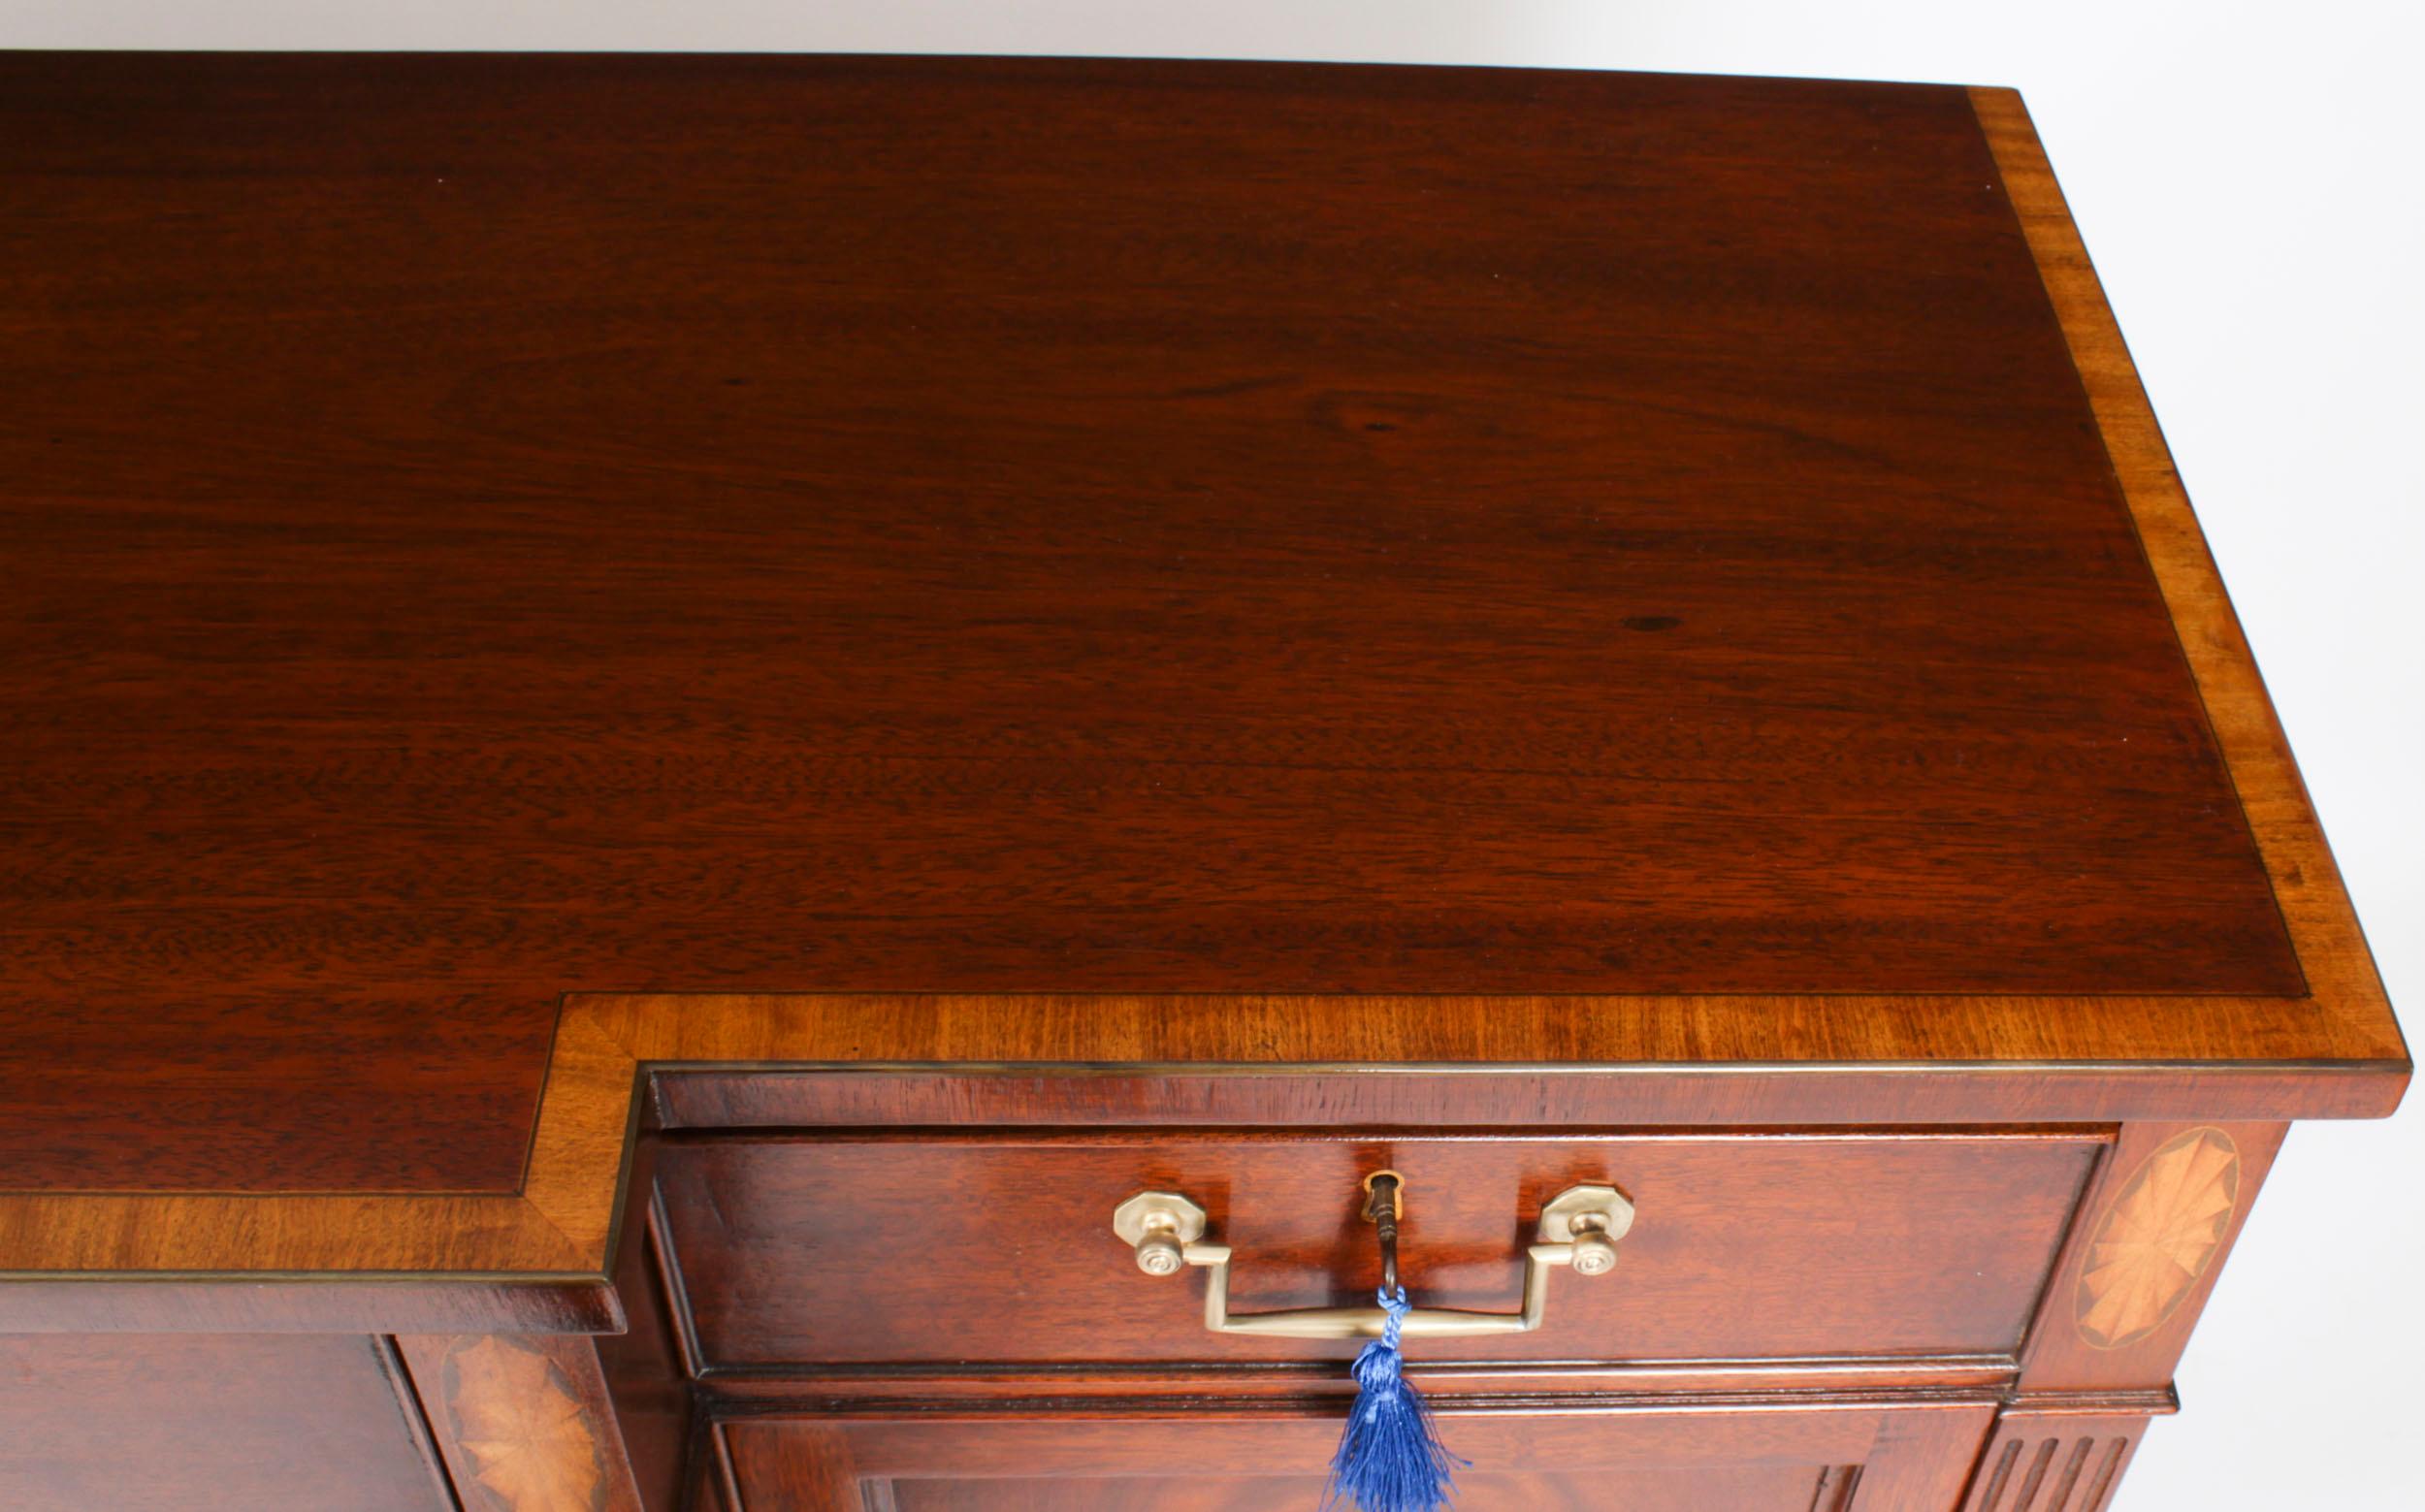 Regency Revival Vintage Flame Mahogany Sideboard by William Tillman, 20th Century For Sale